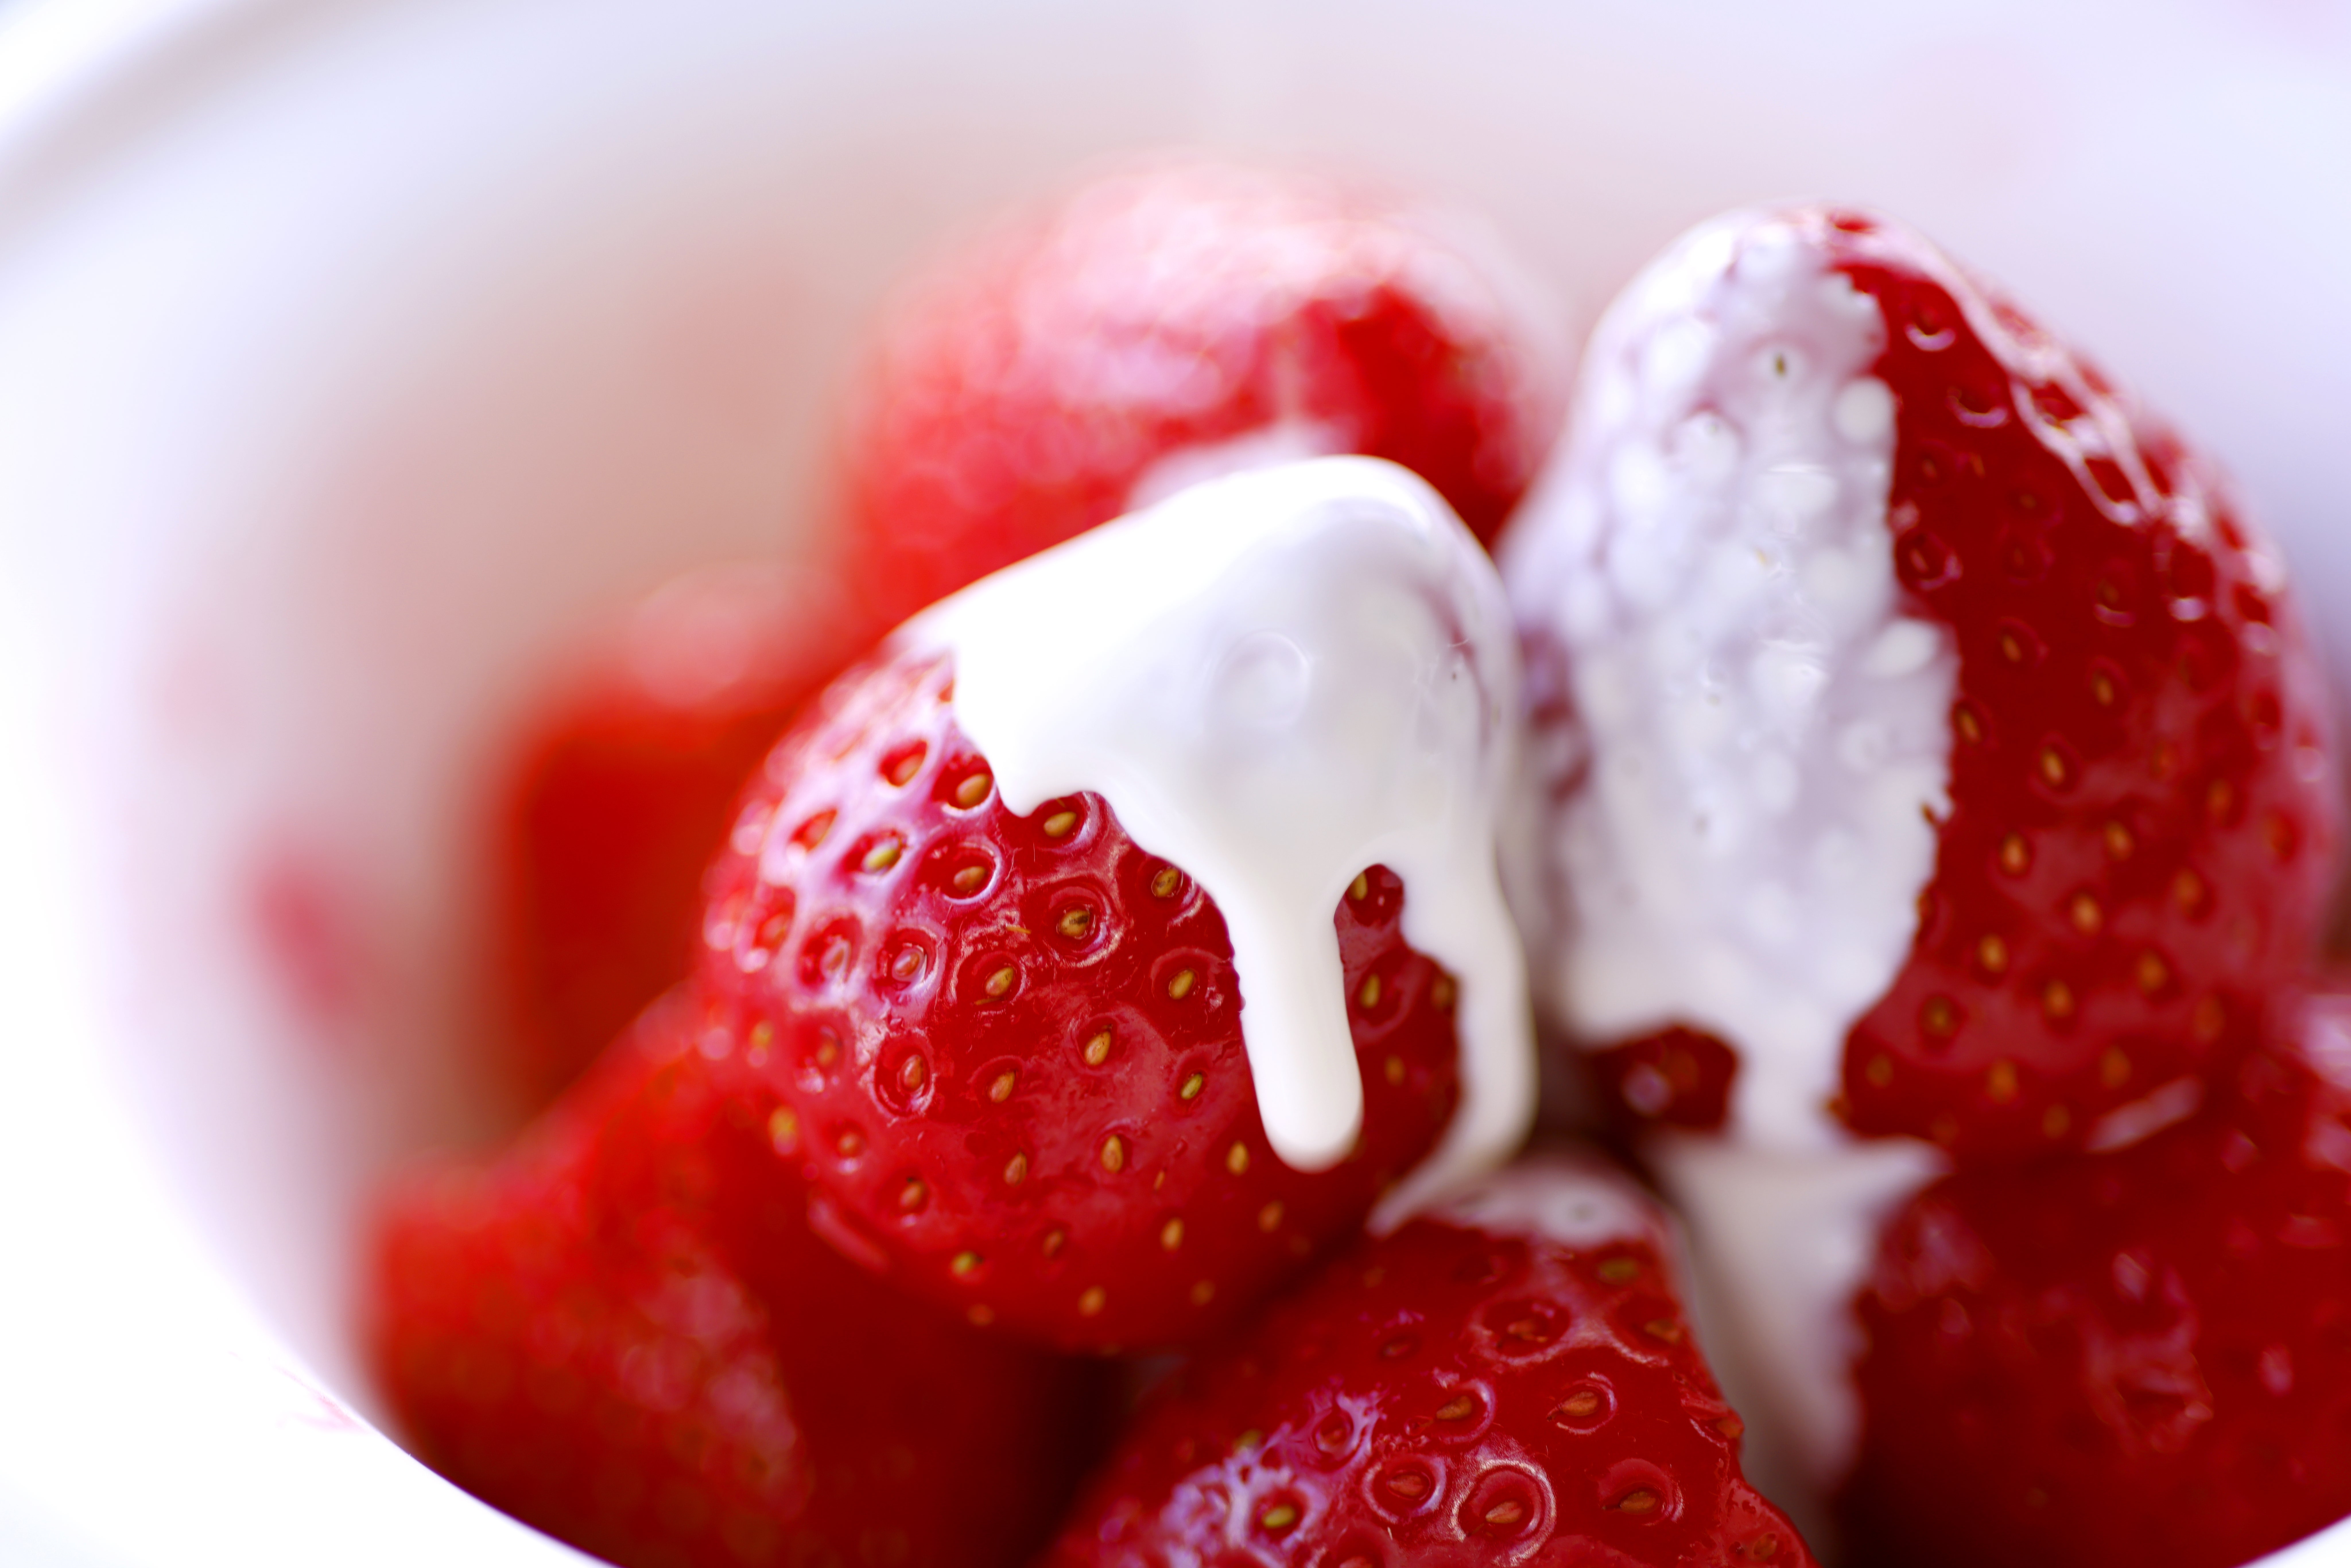 Wimbledon’s famous strawberries and cream are sourced from local farms (Steven Paston/PA.